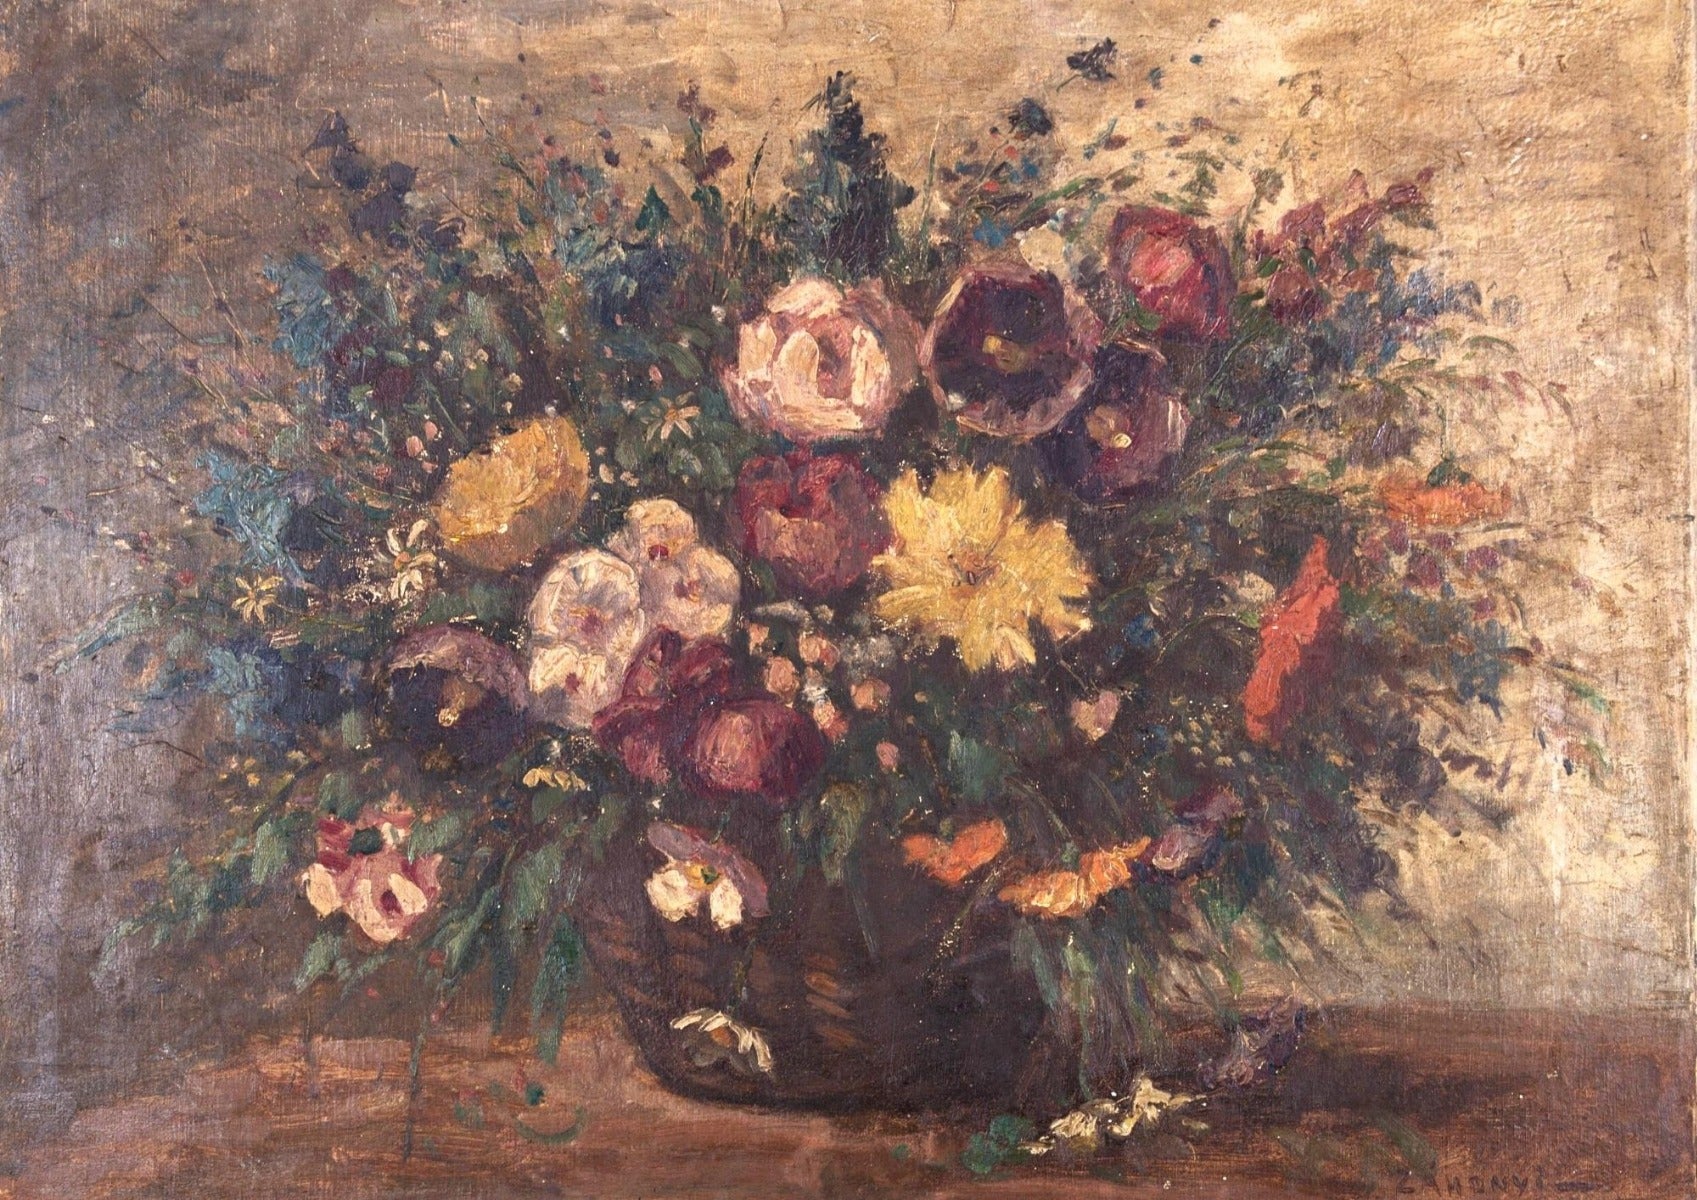 This charming floral arrangement in a wicker basket is painted in dark, rustic tones and expressive brushstrokes. Signed to the lower right. On board.